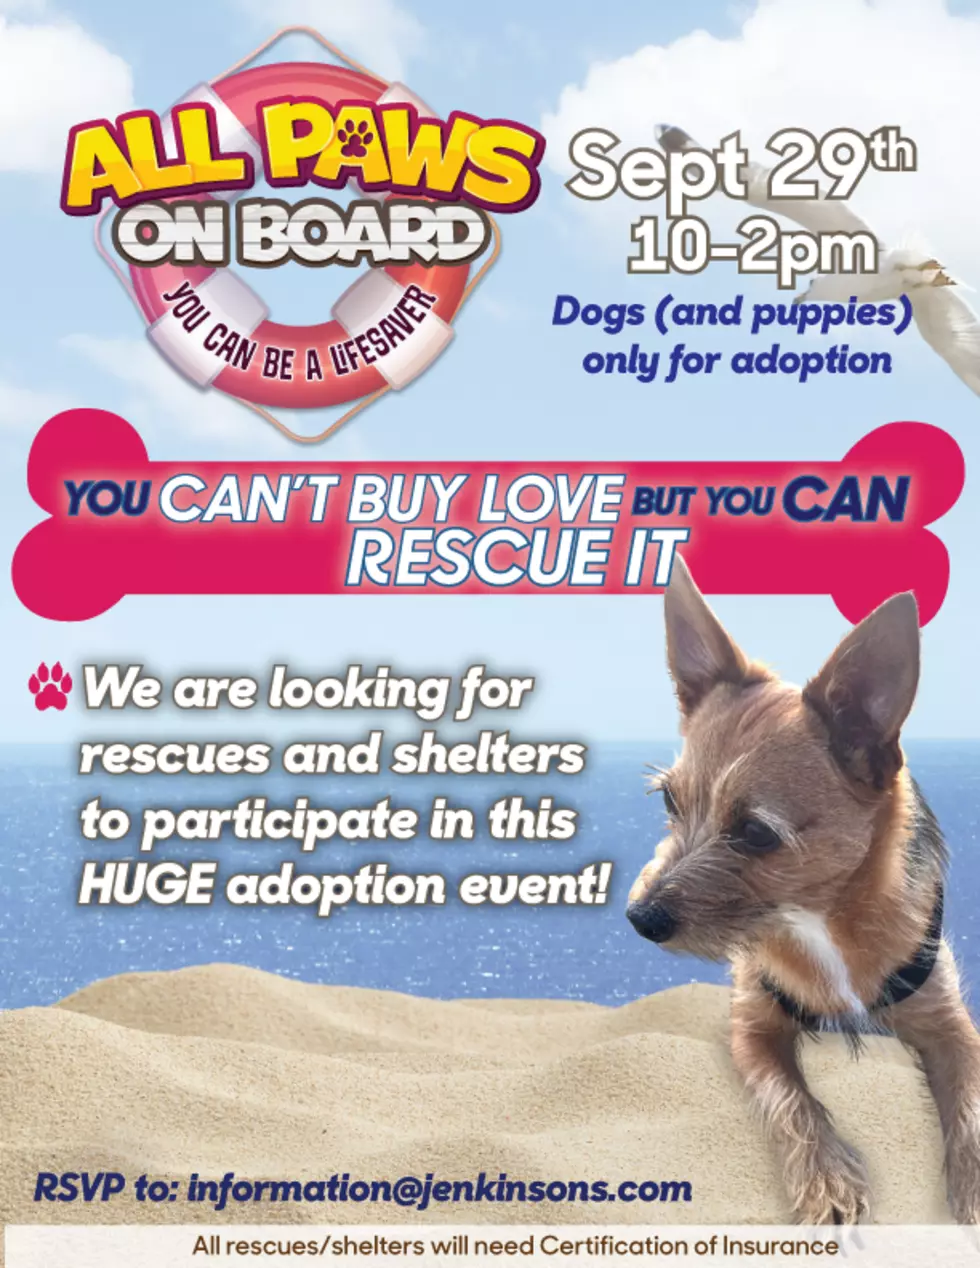 Come Rescue a Dog on the Beach at Jenkinson’s